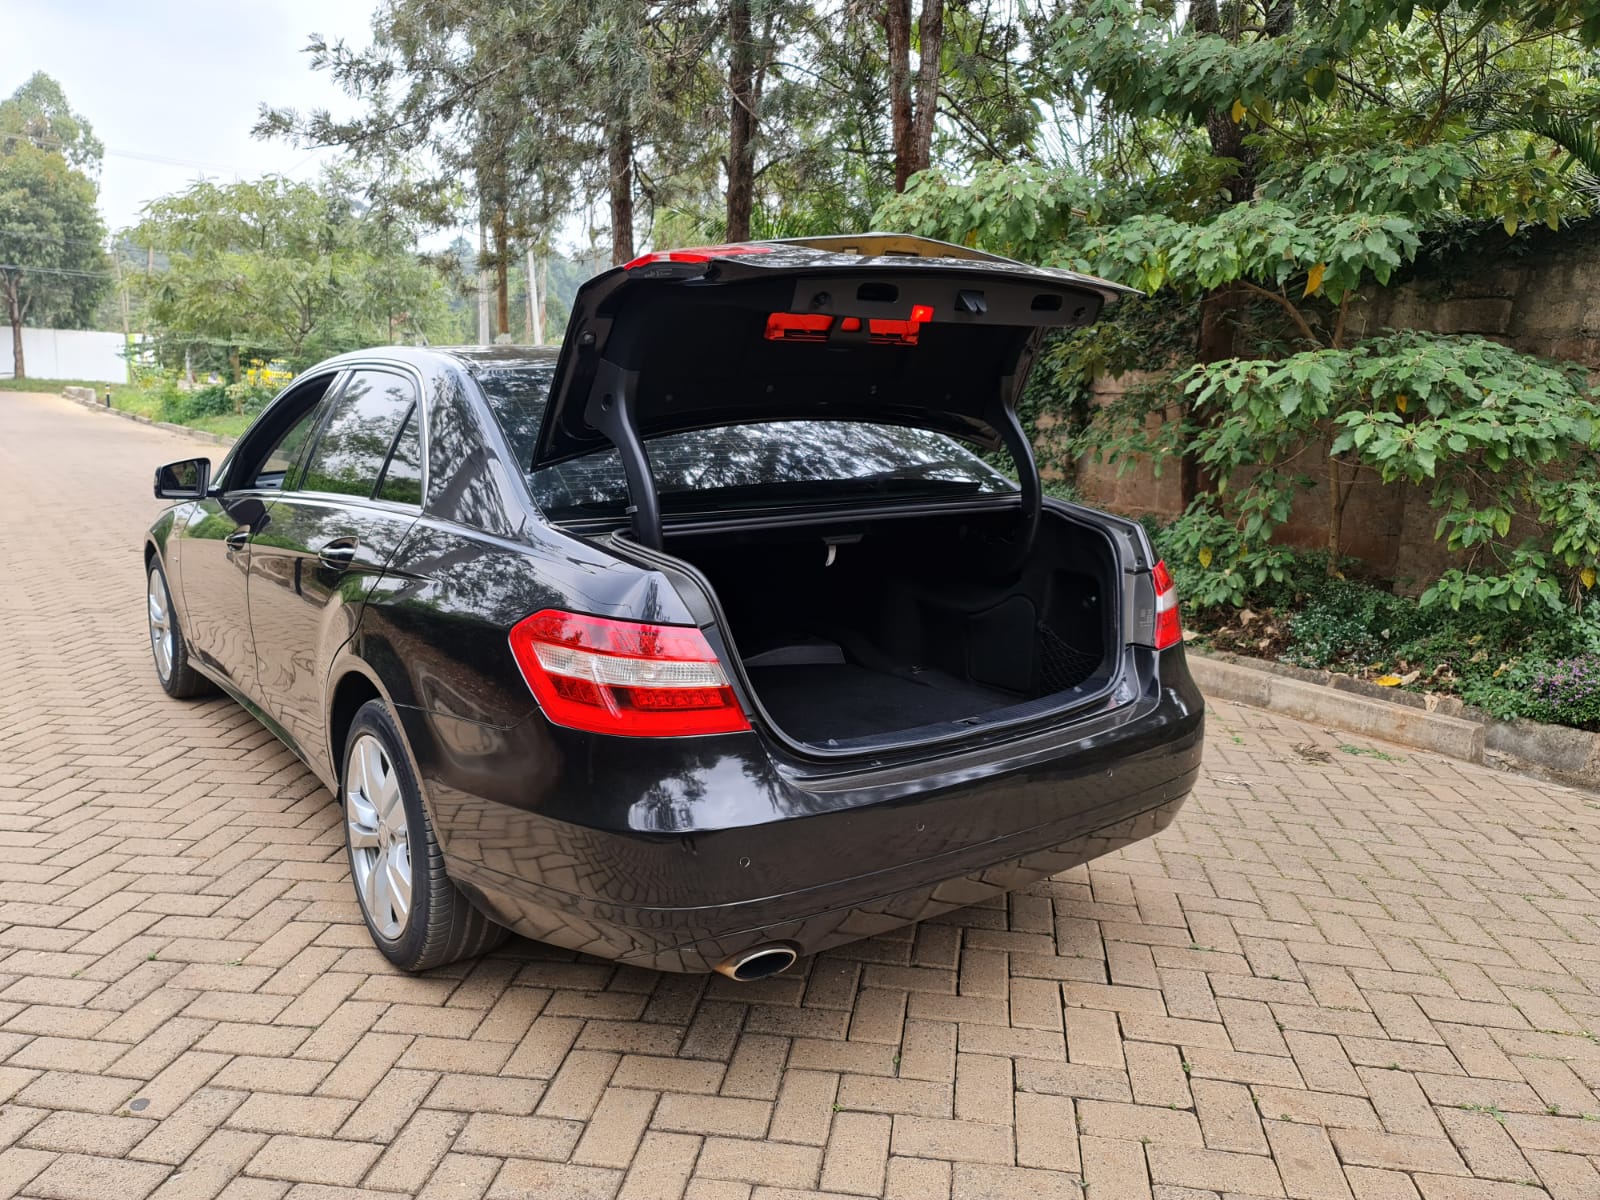 Mercedes Benz E200 2010 Cleanest Offer Local